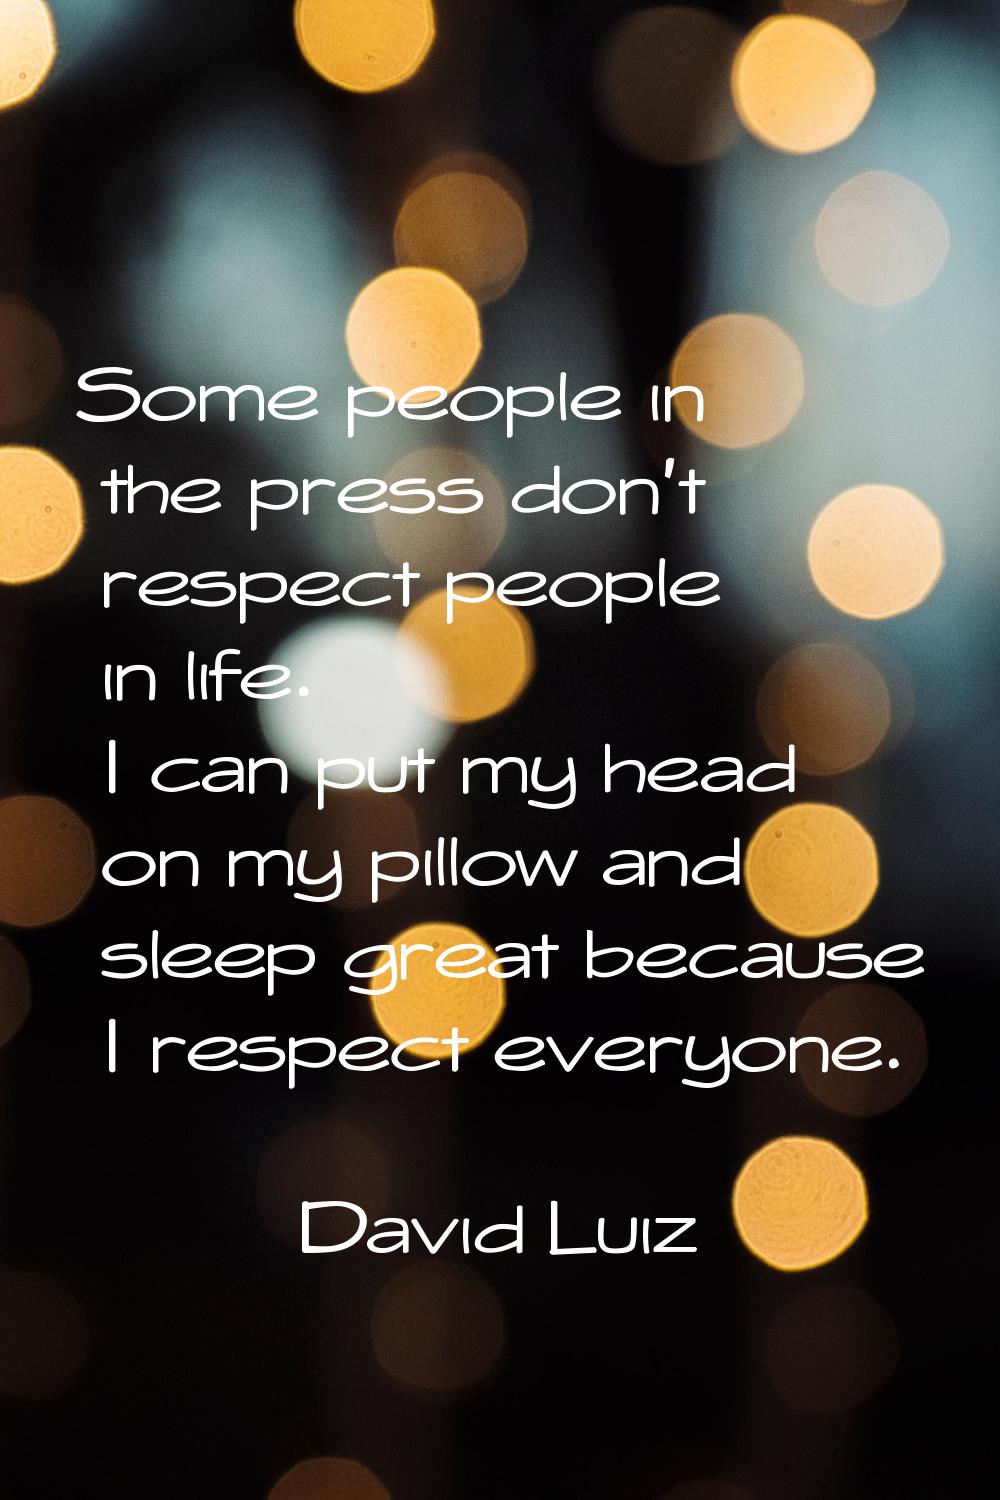 Some people in the press don't respect people in life. I can put my head on my pillow and sleep gre